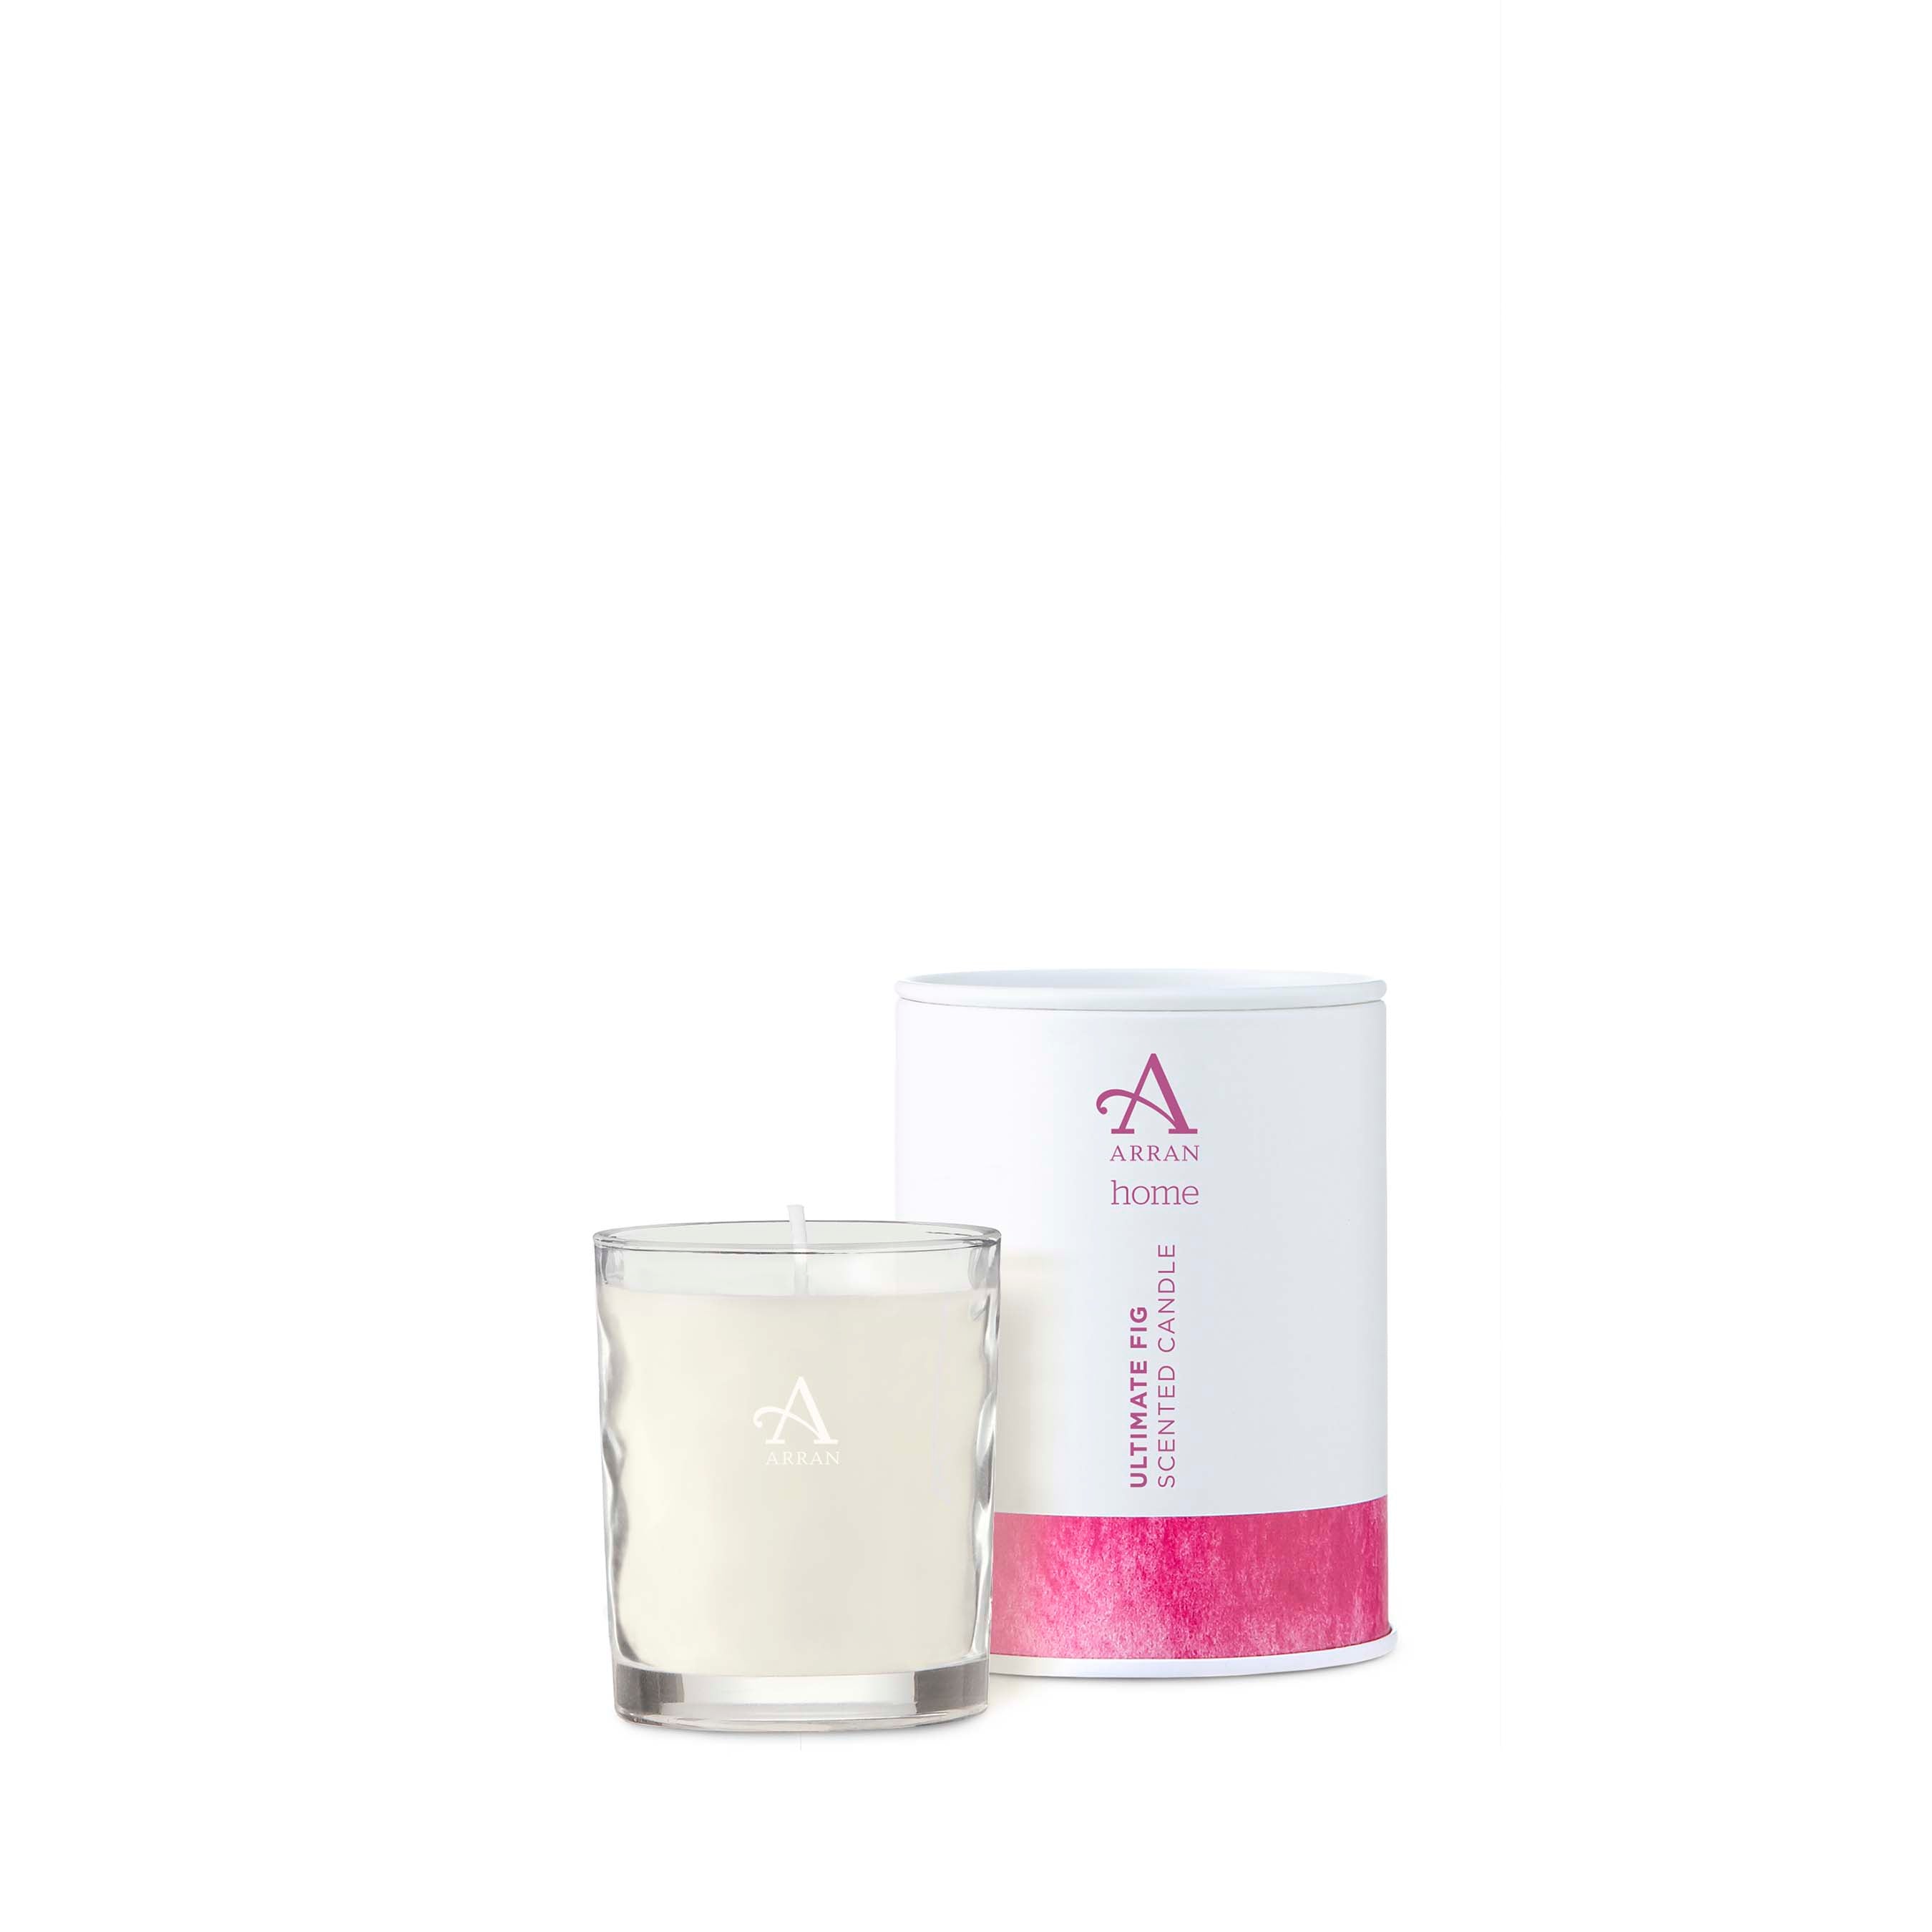 An image of ARRAN Ultimate Fig Scented Candle 8cl | Made in Scotland | Sweet Cassis Fig & Gr...